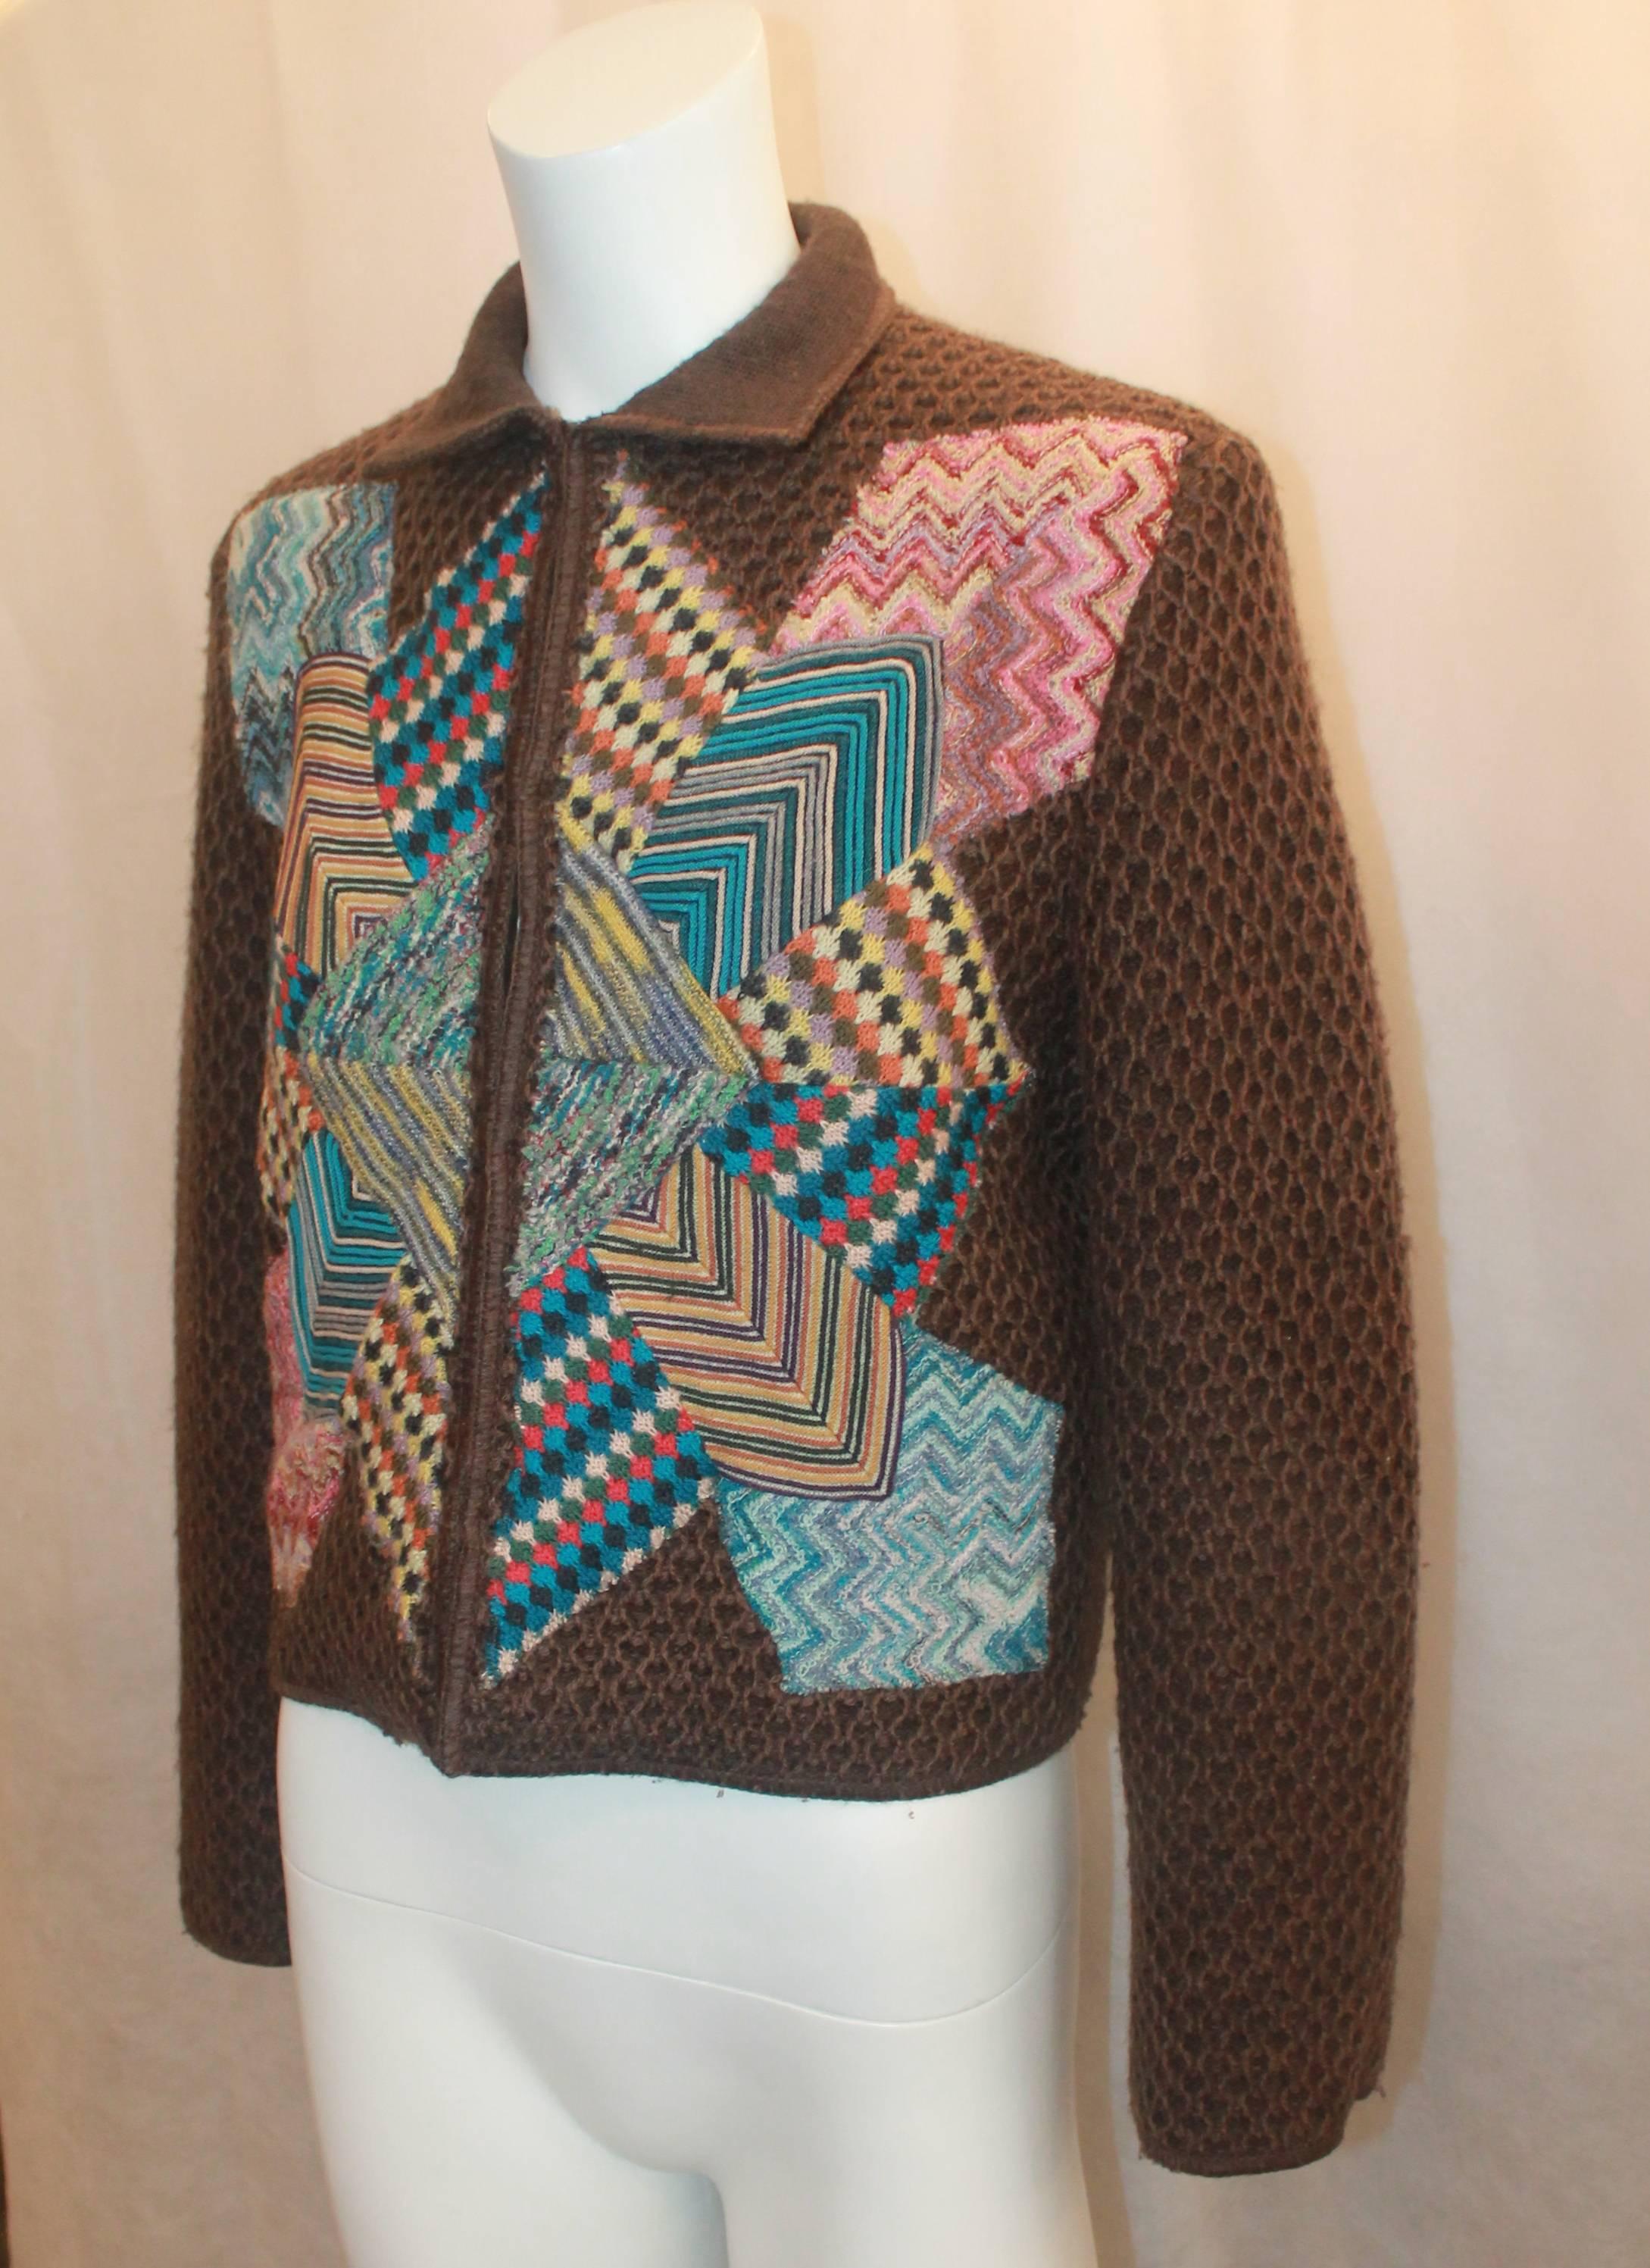 2001 Missoni Collectible Brown Wool Jacket w/ Multi-Colored Geometric Patchwork Design - 40.  This artsy jacket is in excellent condition.  It features a brown, textured wool material, a multi-colored geometric patchwork design in both the front and